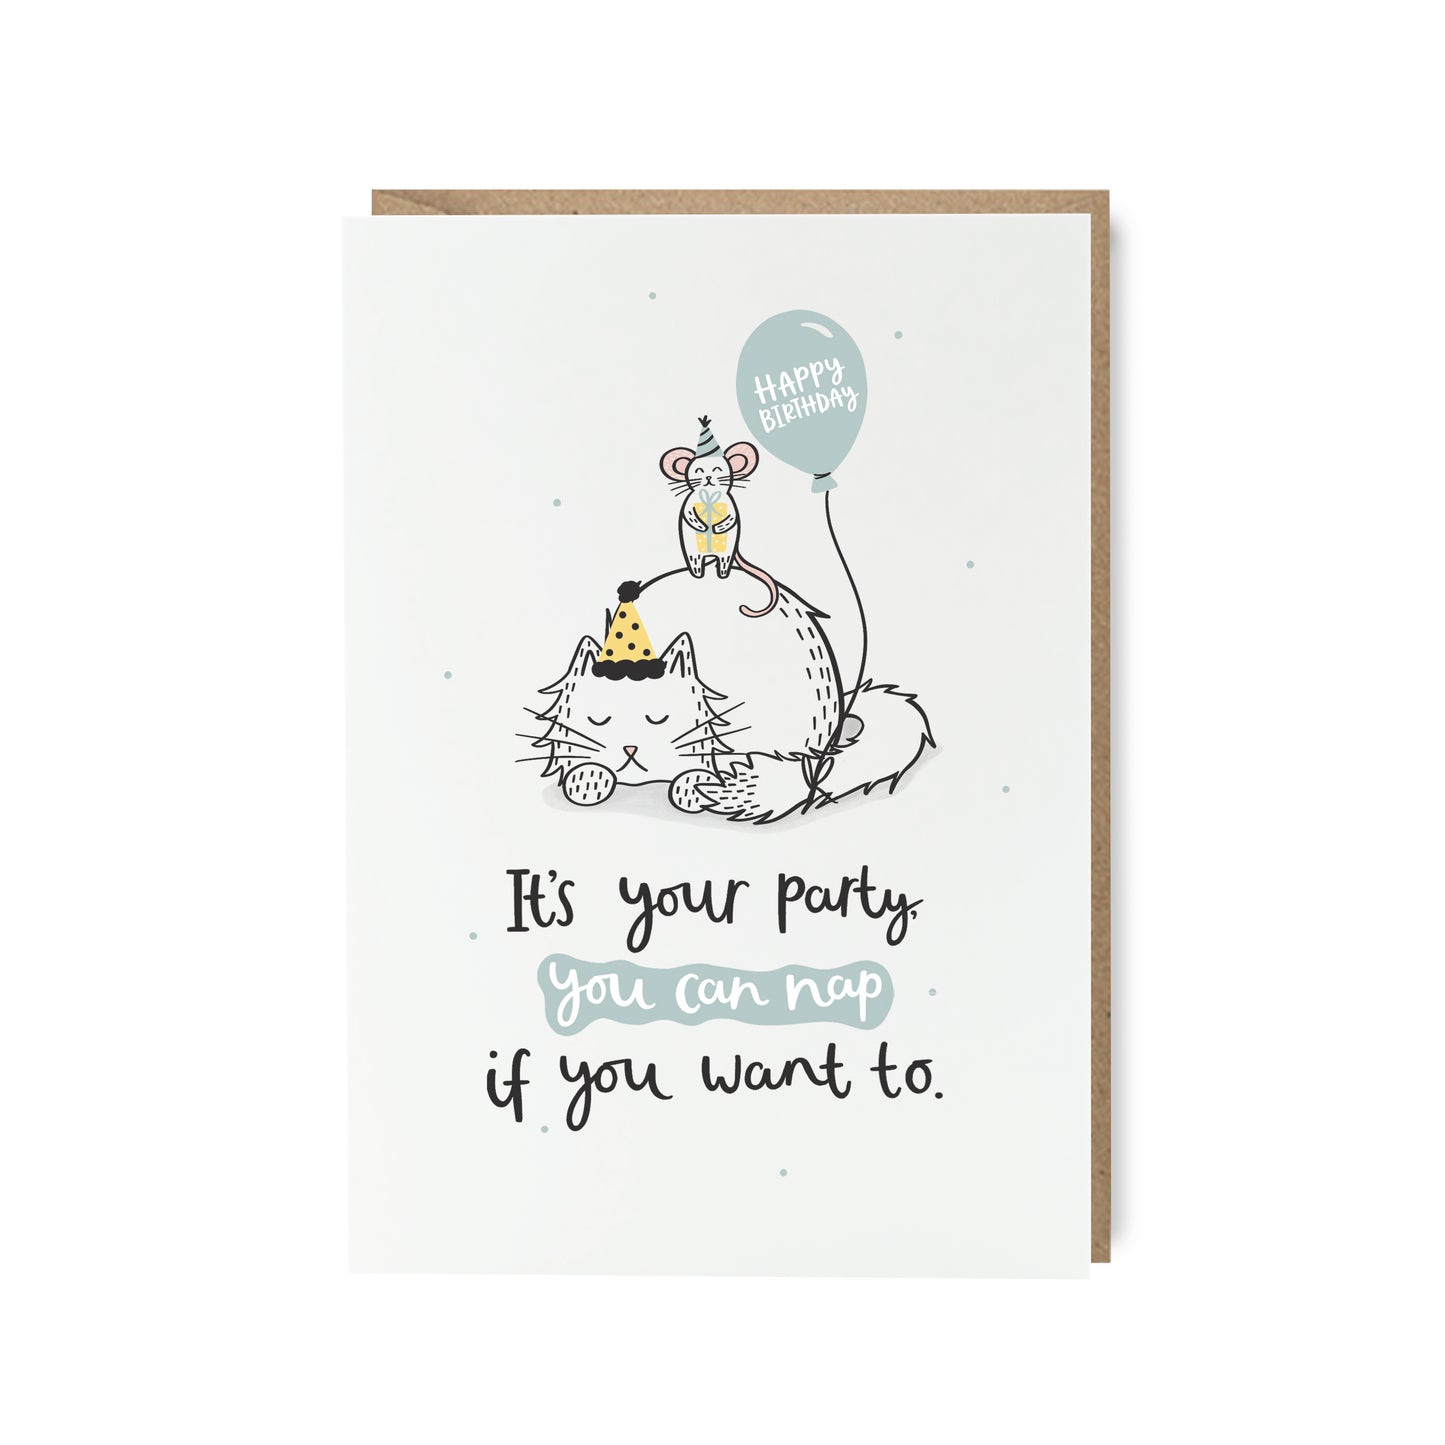 It's your party cat nap funny birthday card by abbie imagine